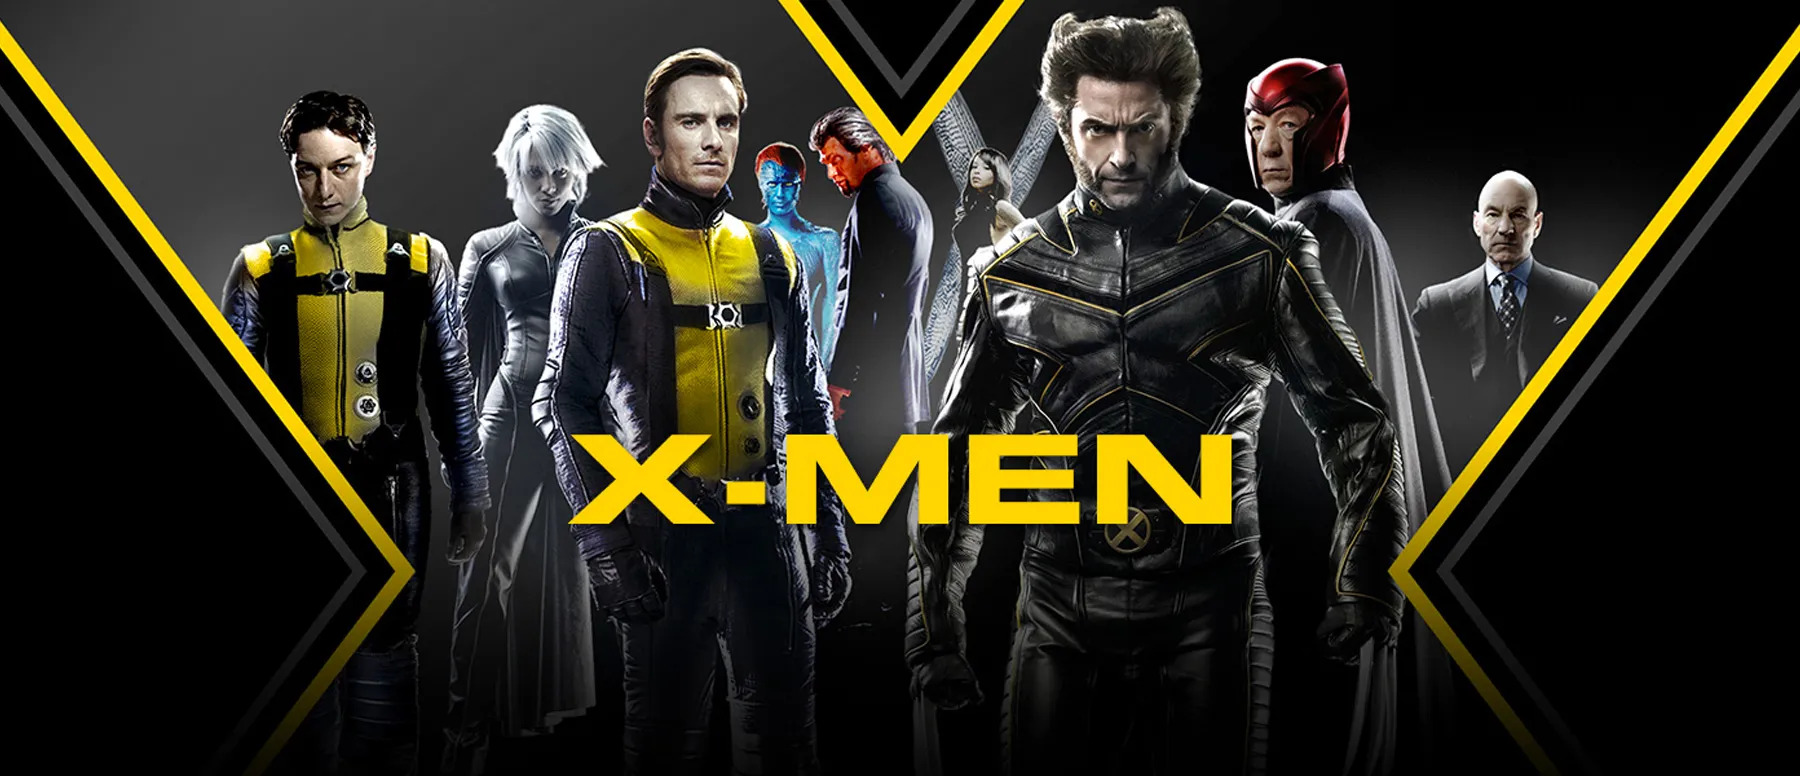 36-facts-about-the-movie-x-men